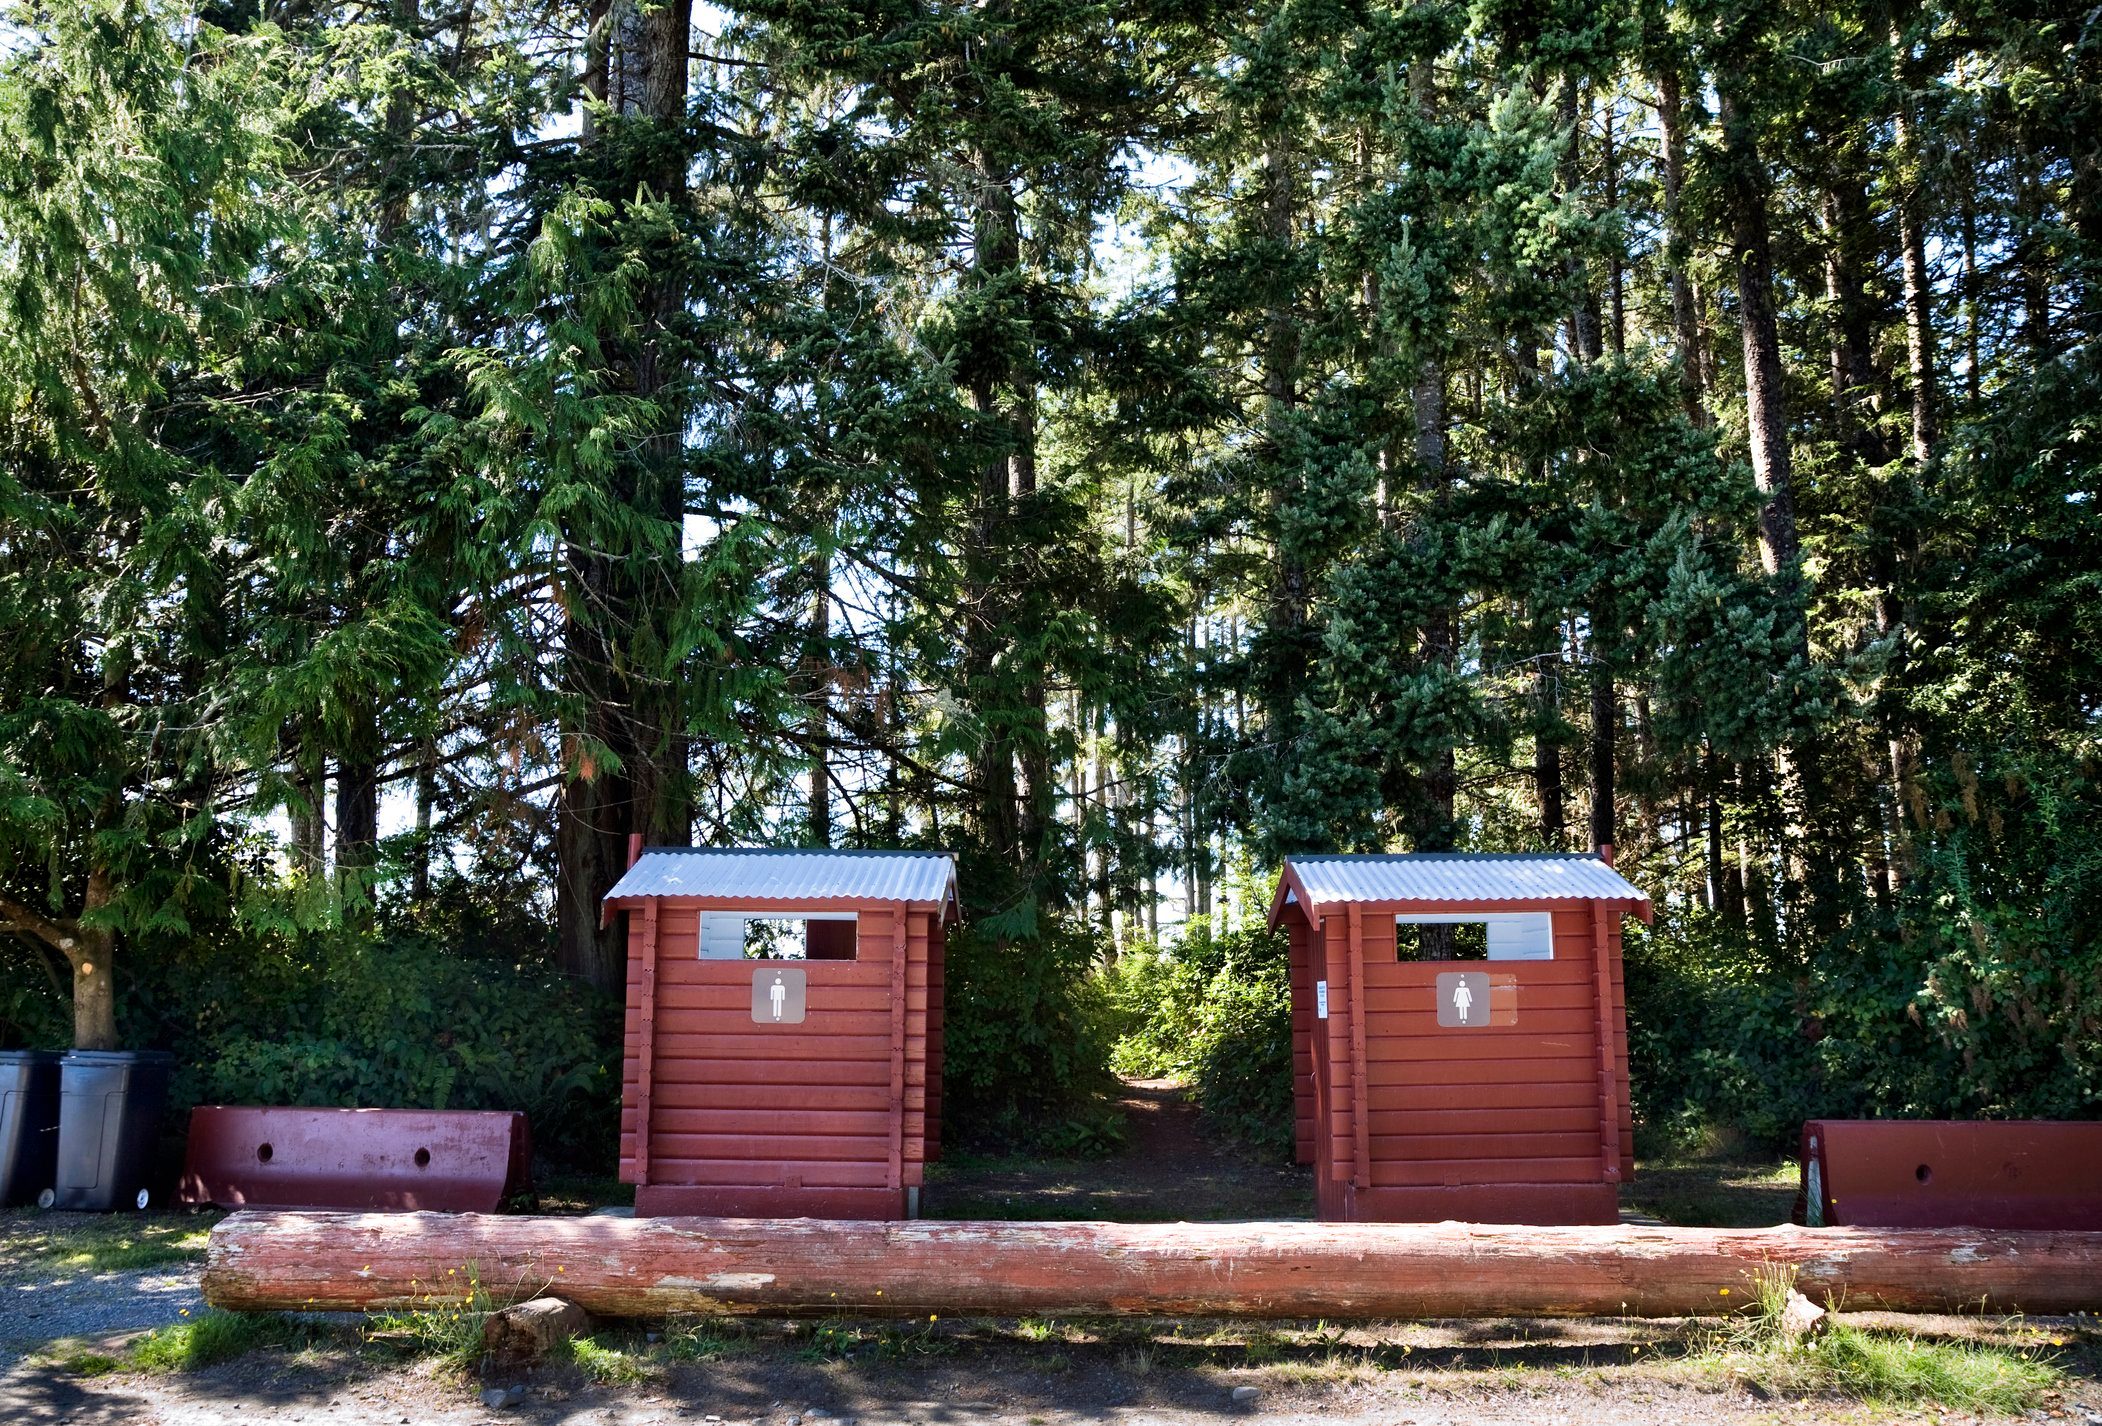 Public Toilets in Campground